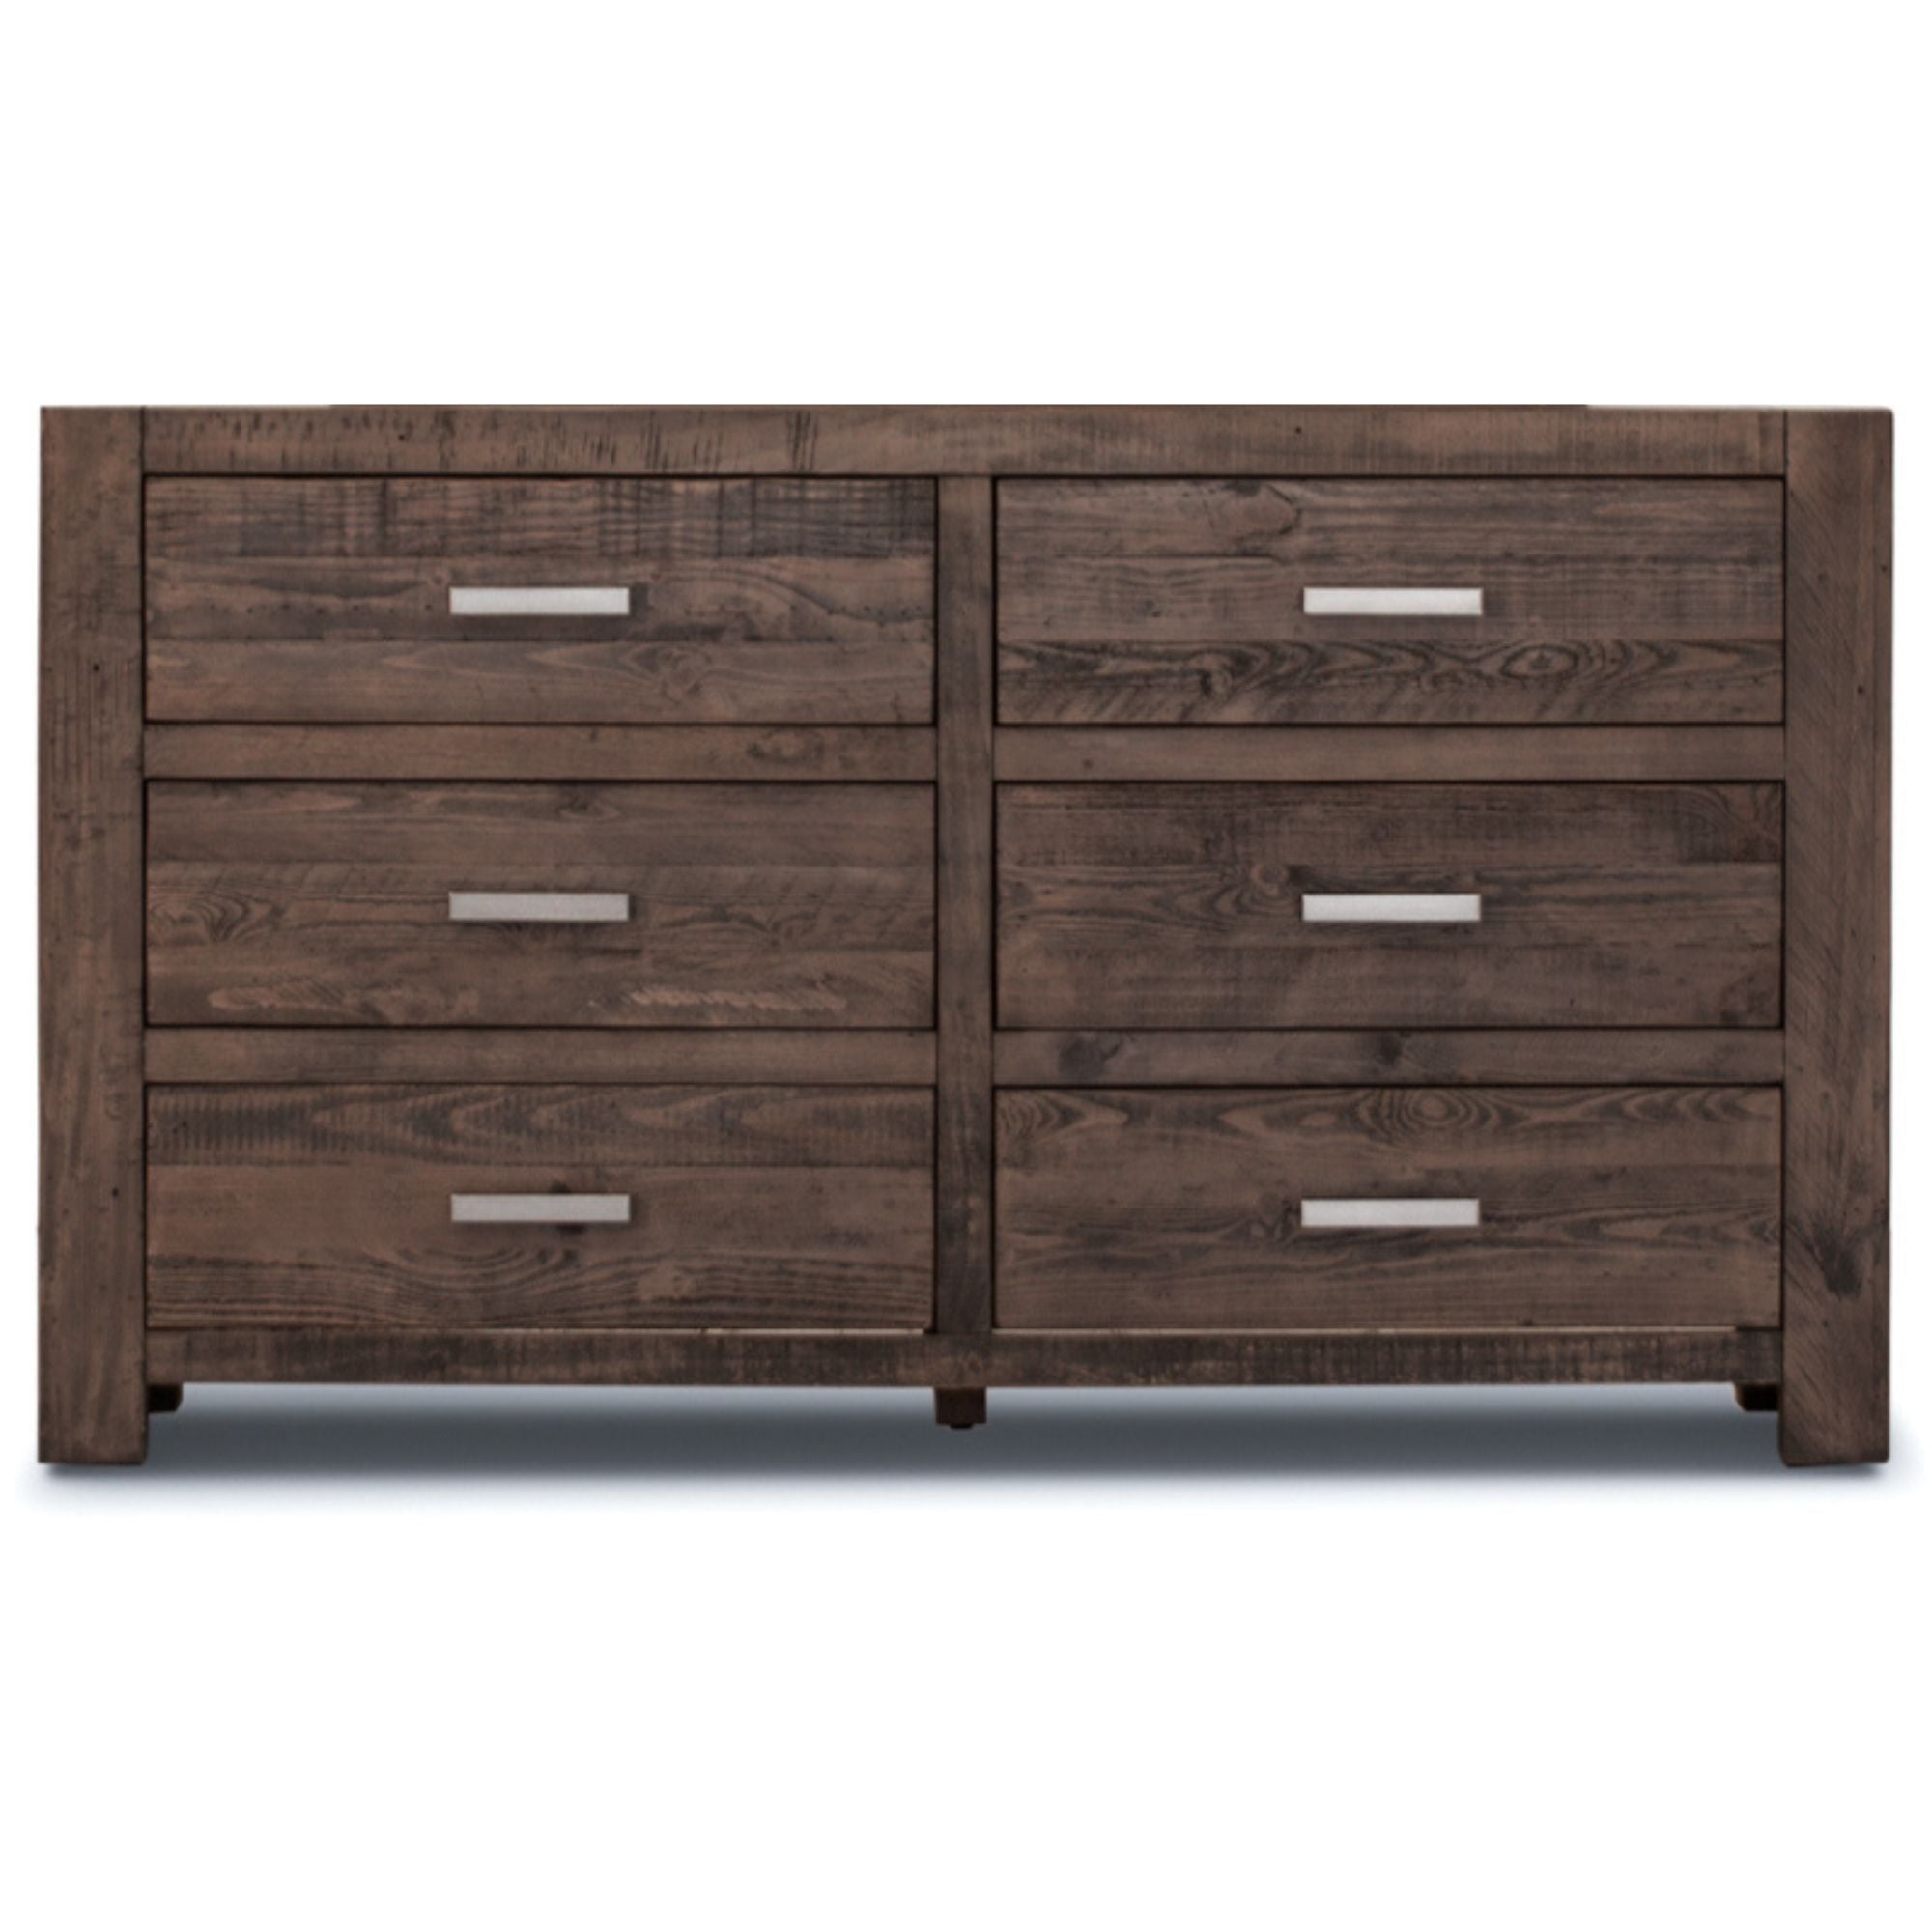 6 Chest of Drawers Solid Pine Wood Storage Cabinet - Grey Stone